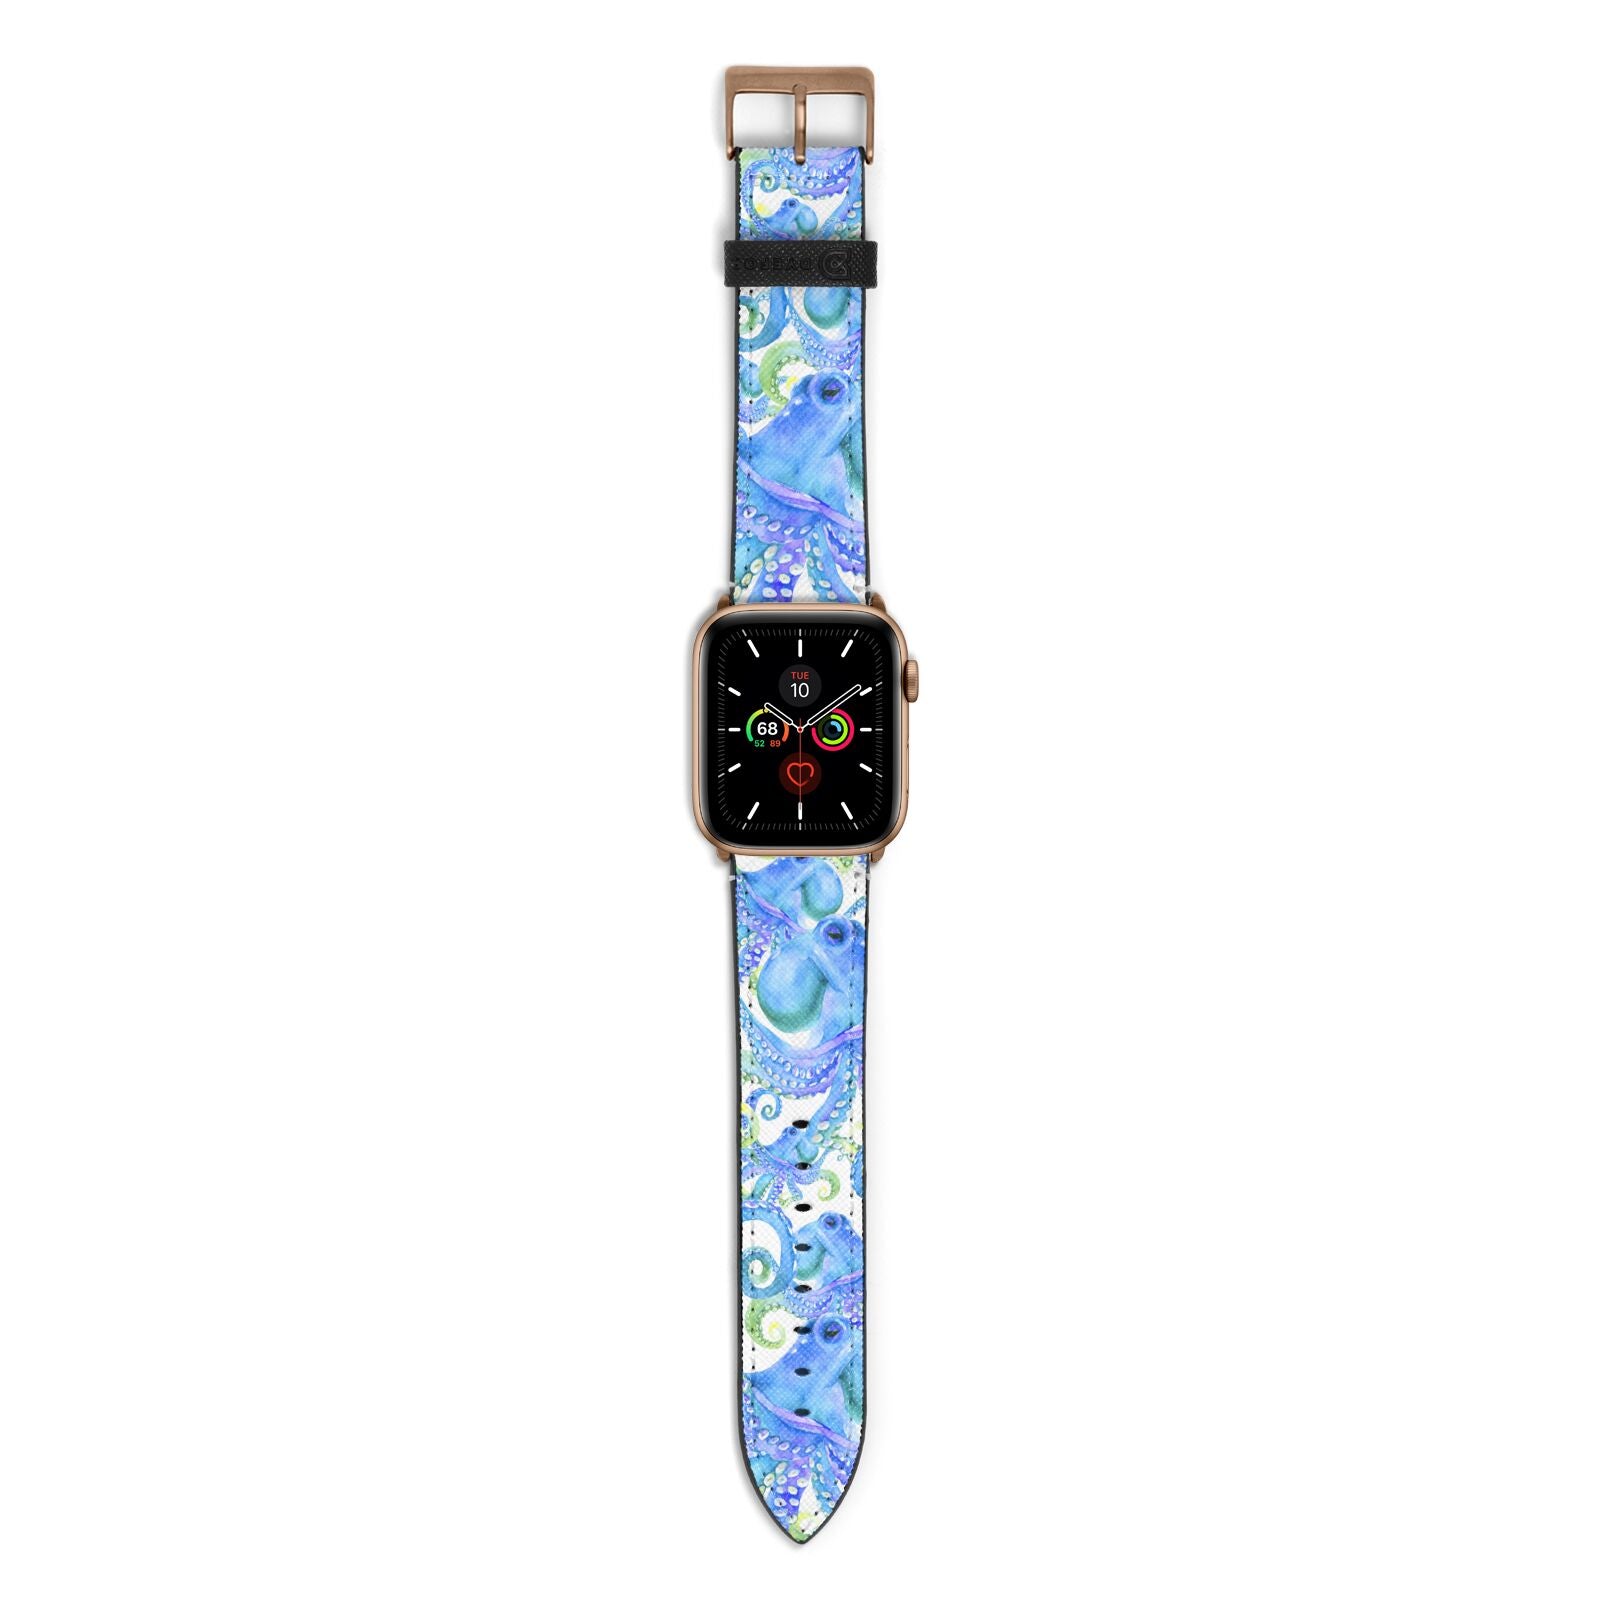 Octopus Apple Watch Strap with Gold Hardware